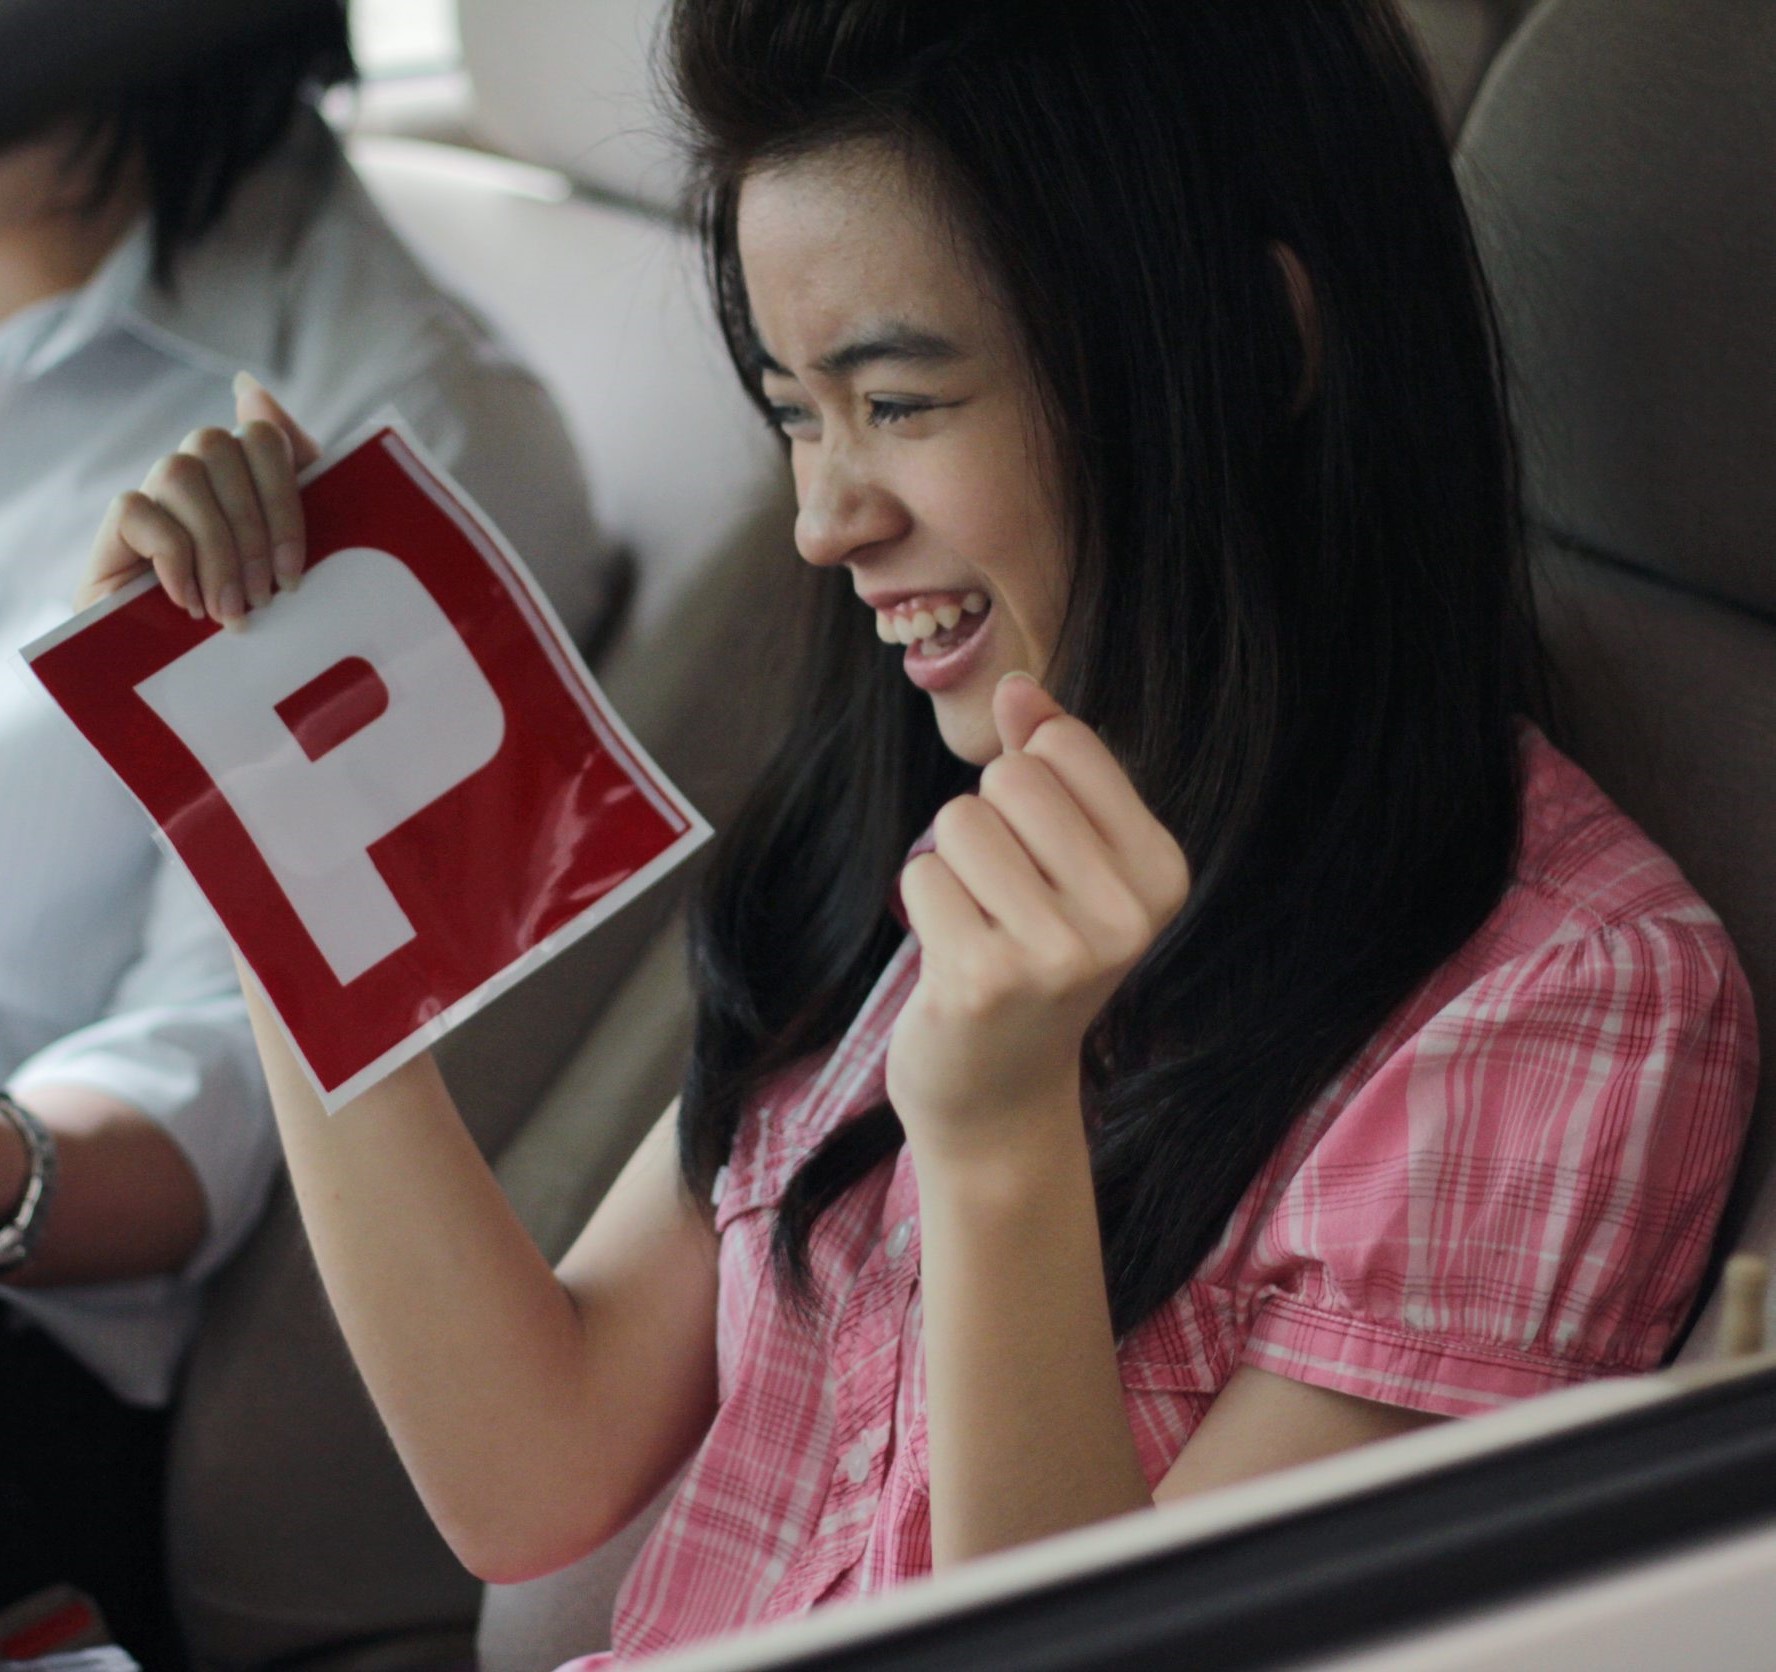 pass road test, get driving license